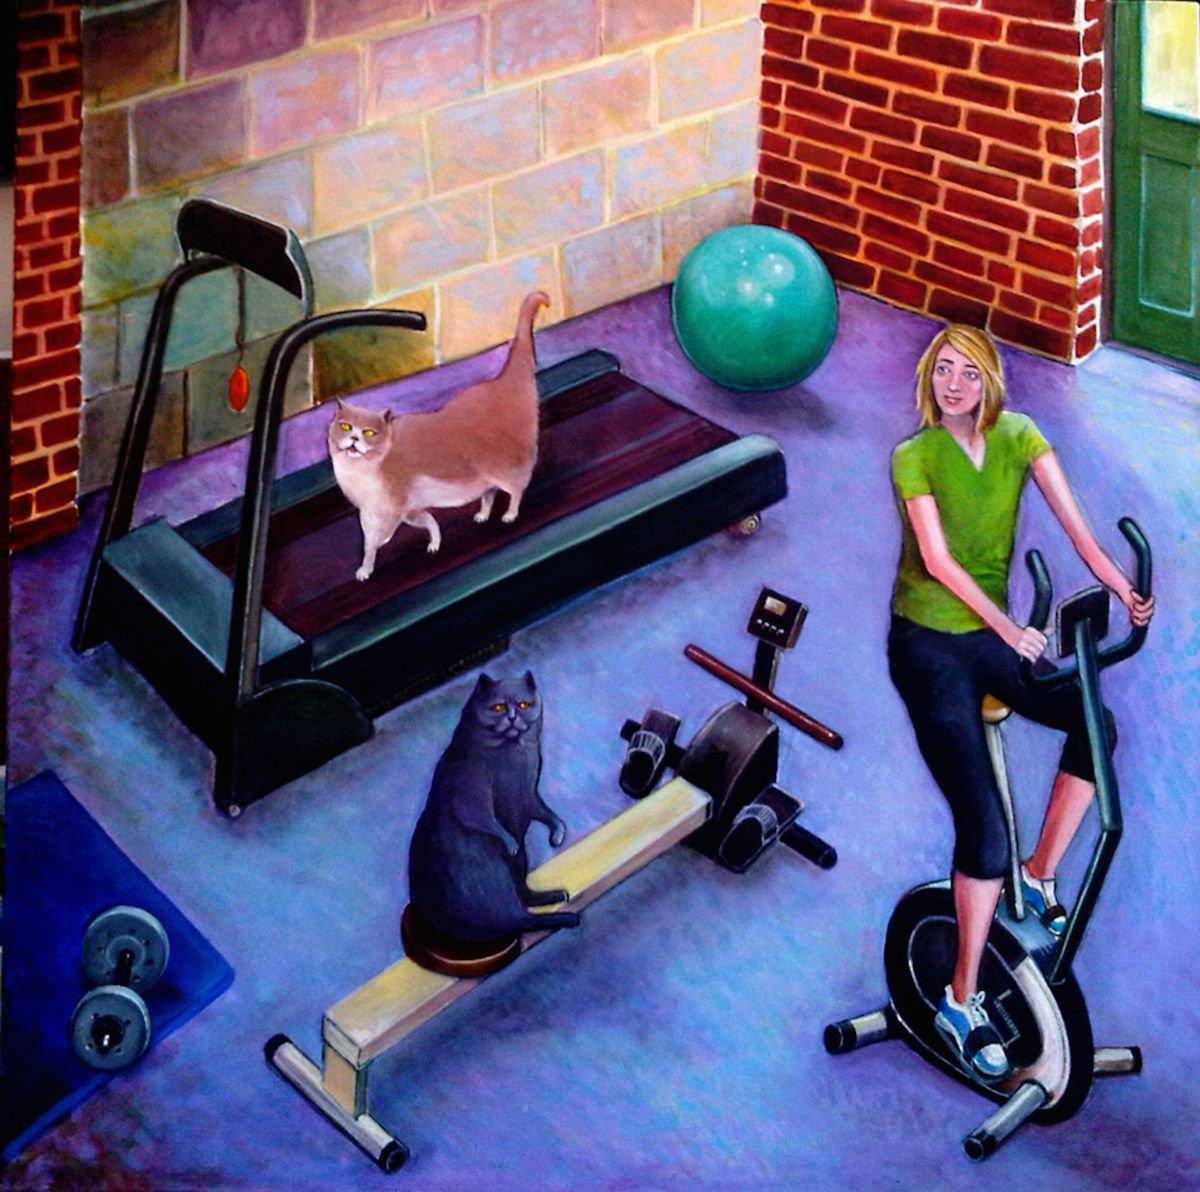 Workout by Victoria Stanway